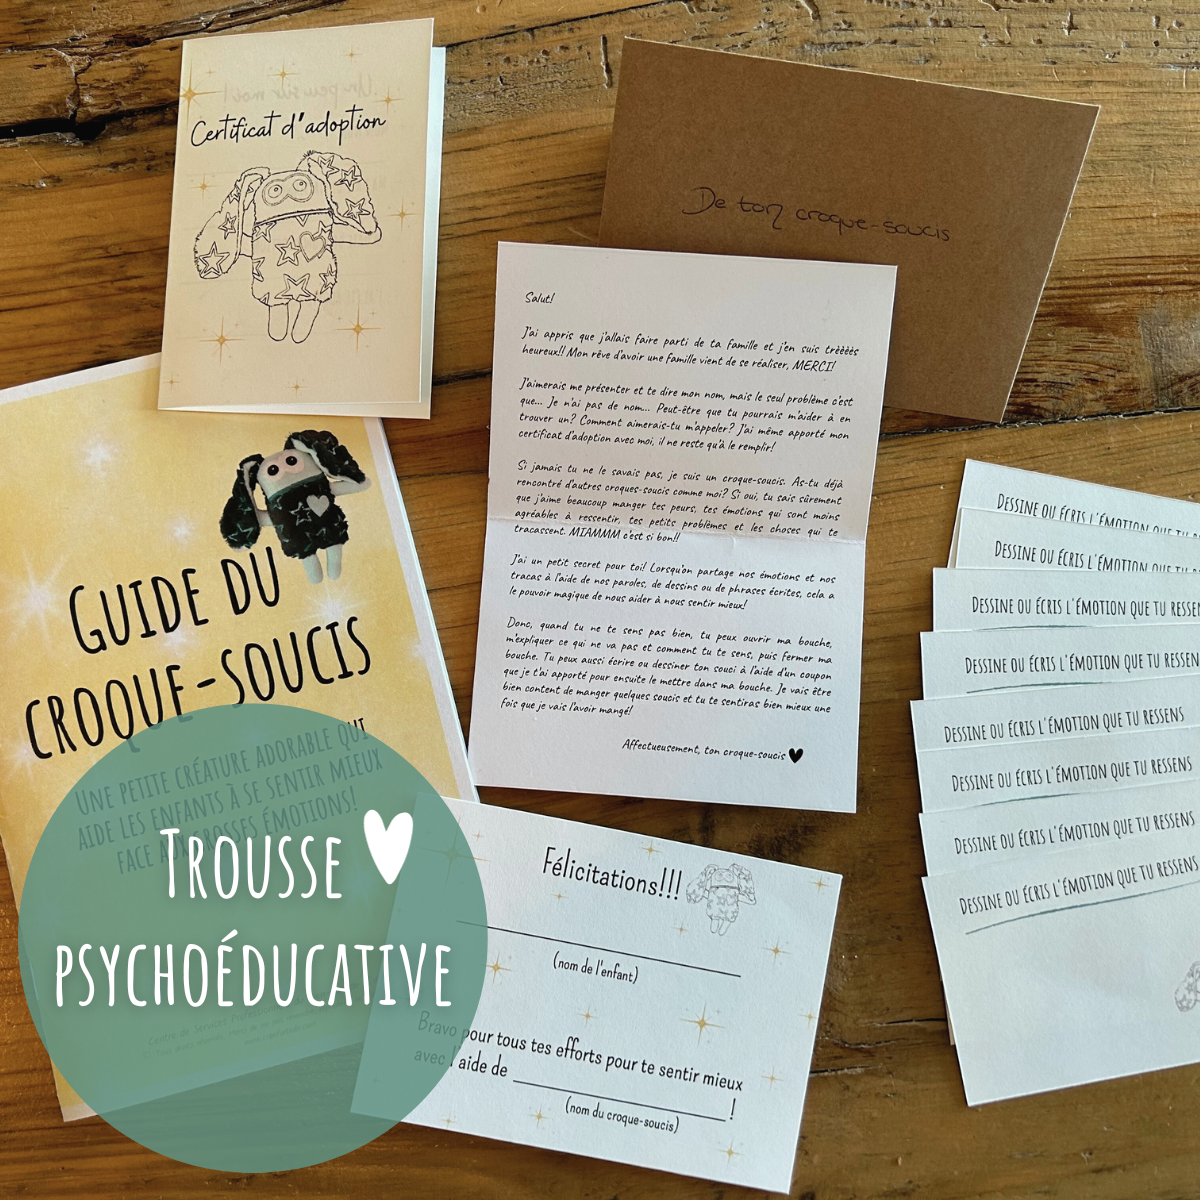 Hunting time - Croque-soucis duo + Access to 2 downloadable psychoeducational tools ✨